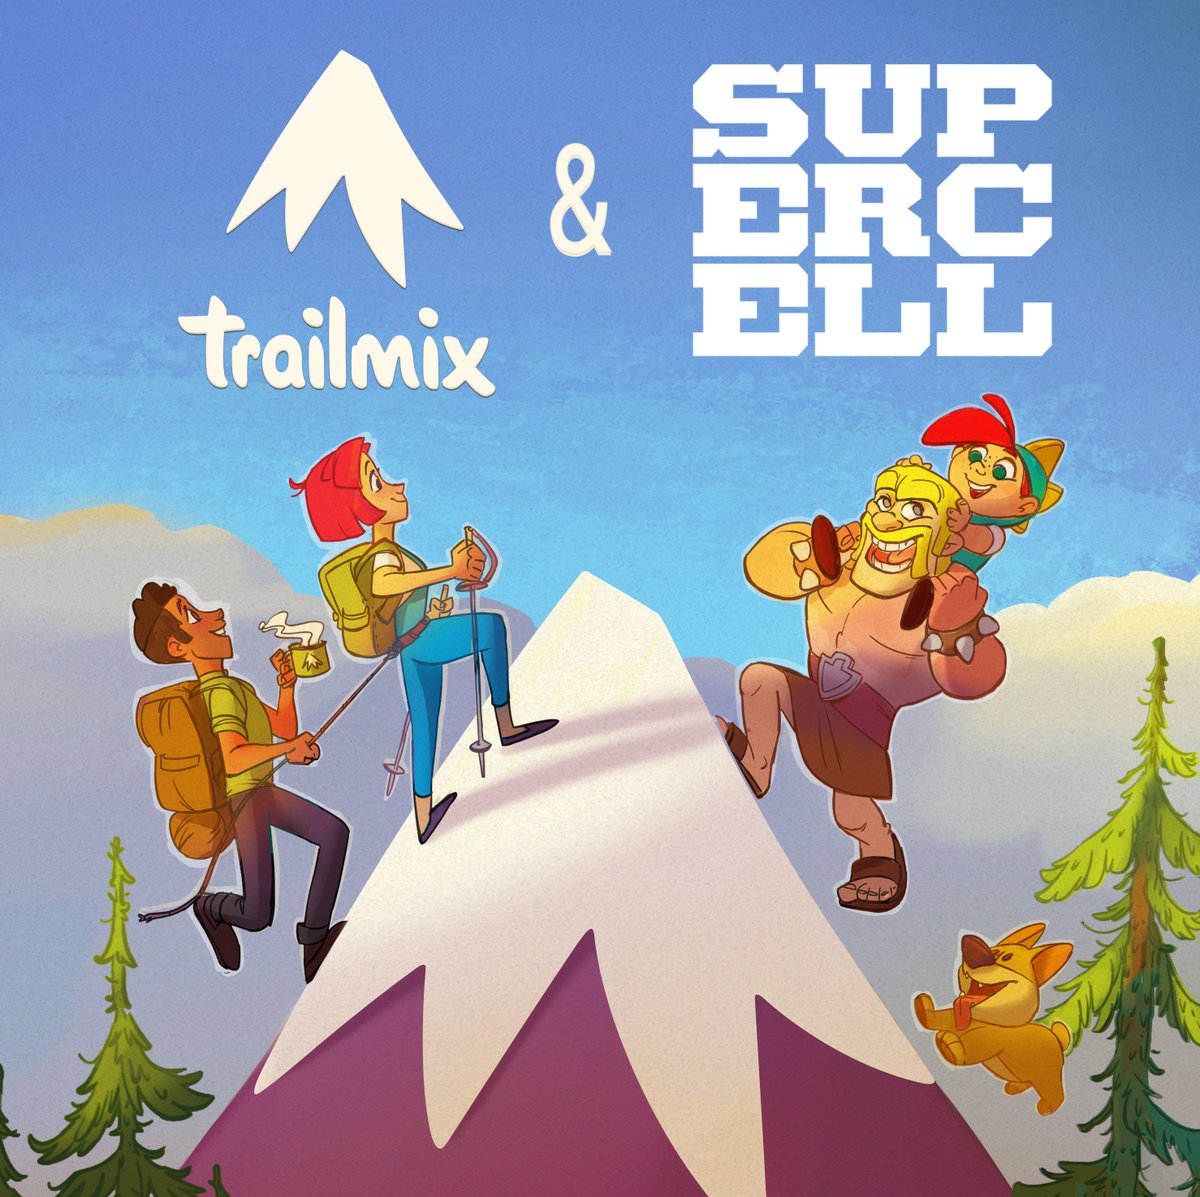 We are incredibly excited to announce that Supercell has acquired a majority stake in Trailmix and has committed another $60million (a mix of equity and debt financing) to hypercharge the growth of Love&Pies! Read more here: medium.com/trailmix/trail…